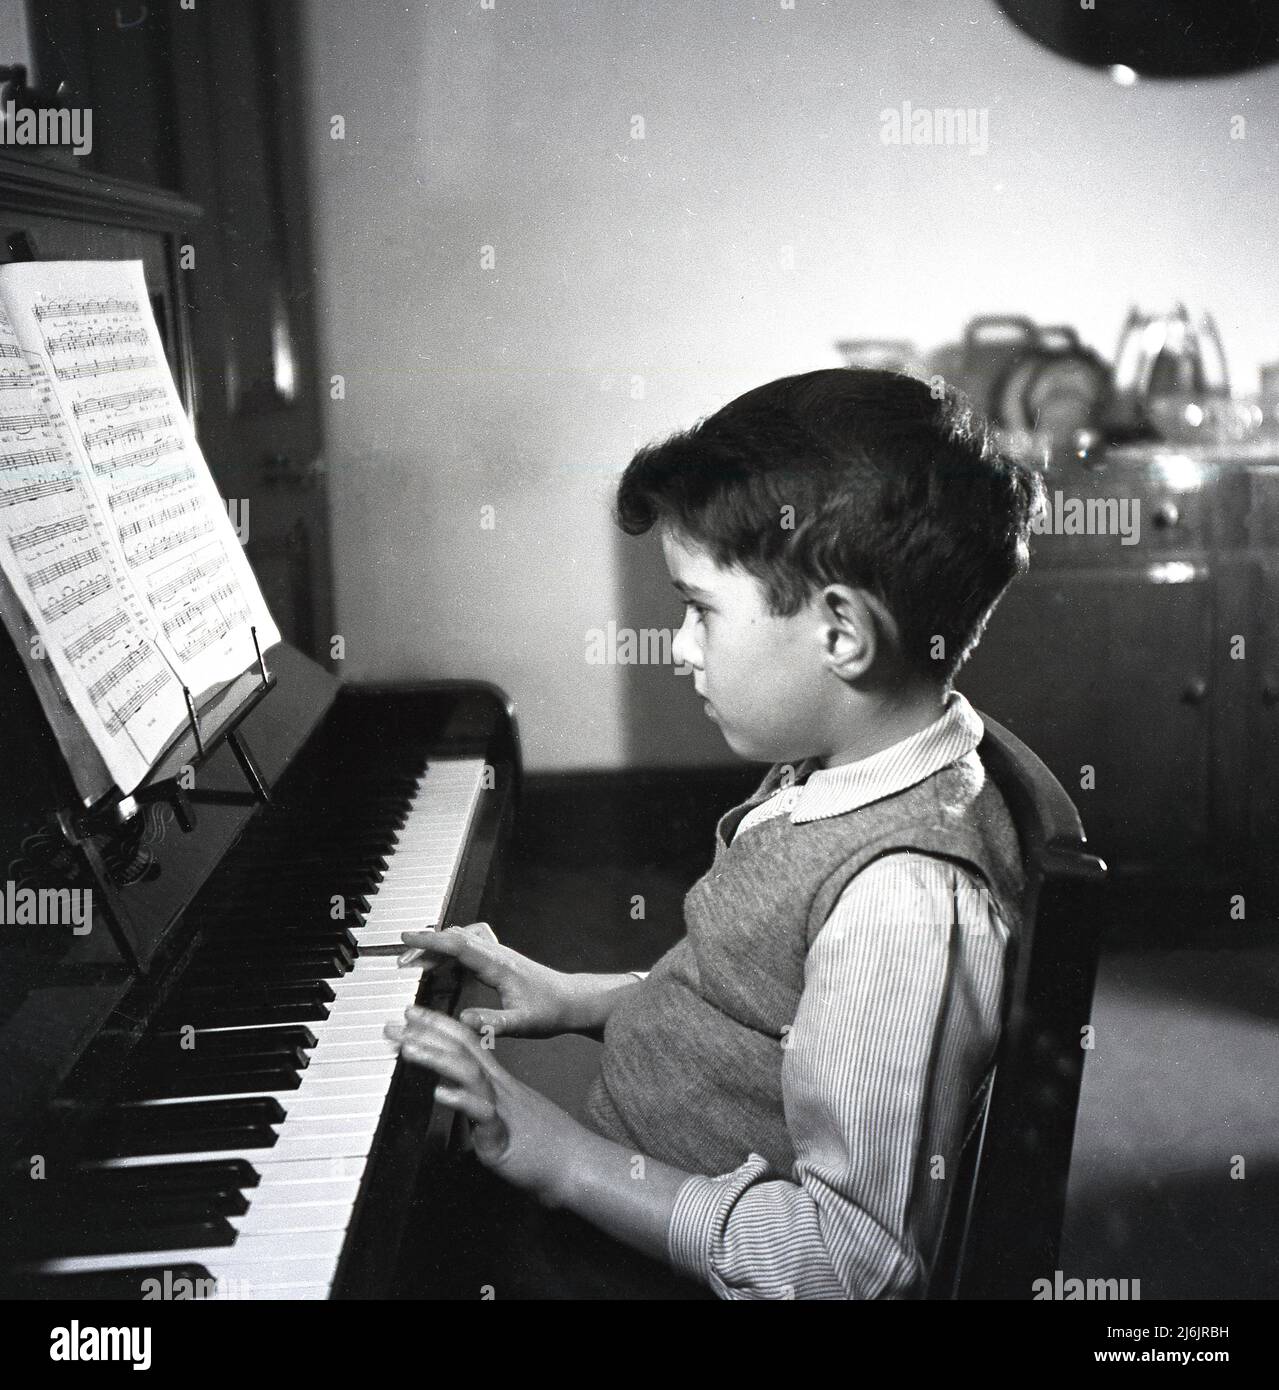 1953, historical, inside a room at home, a young boy sitting playing a traditional upright piano, with sheet music above the keyboard, England, UK. Stock Photo